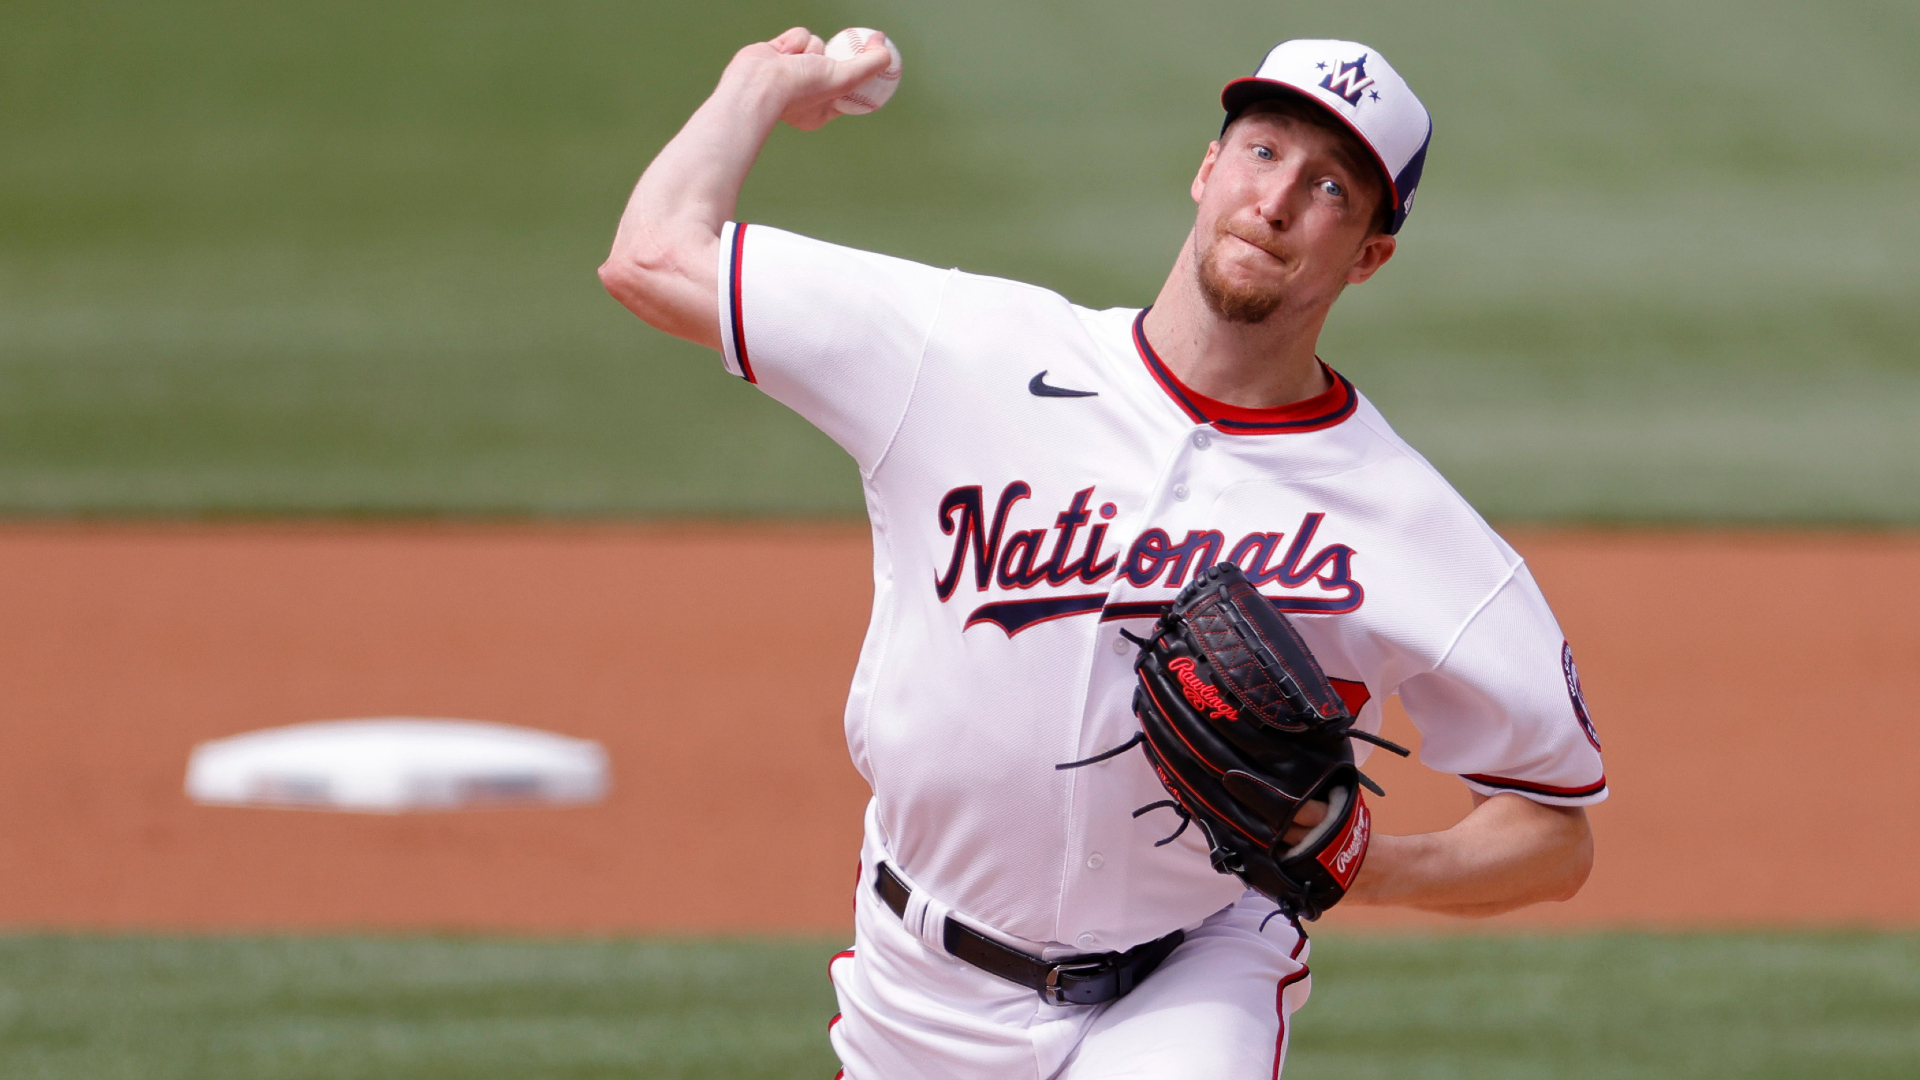 Nationals' Erick Fedde, More Confident Than Ever, Throwing Strikes With Purpose